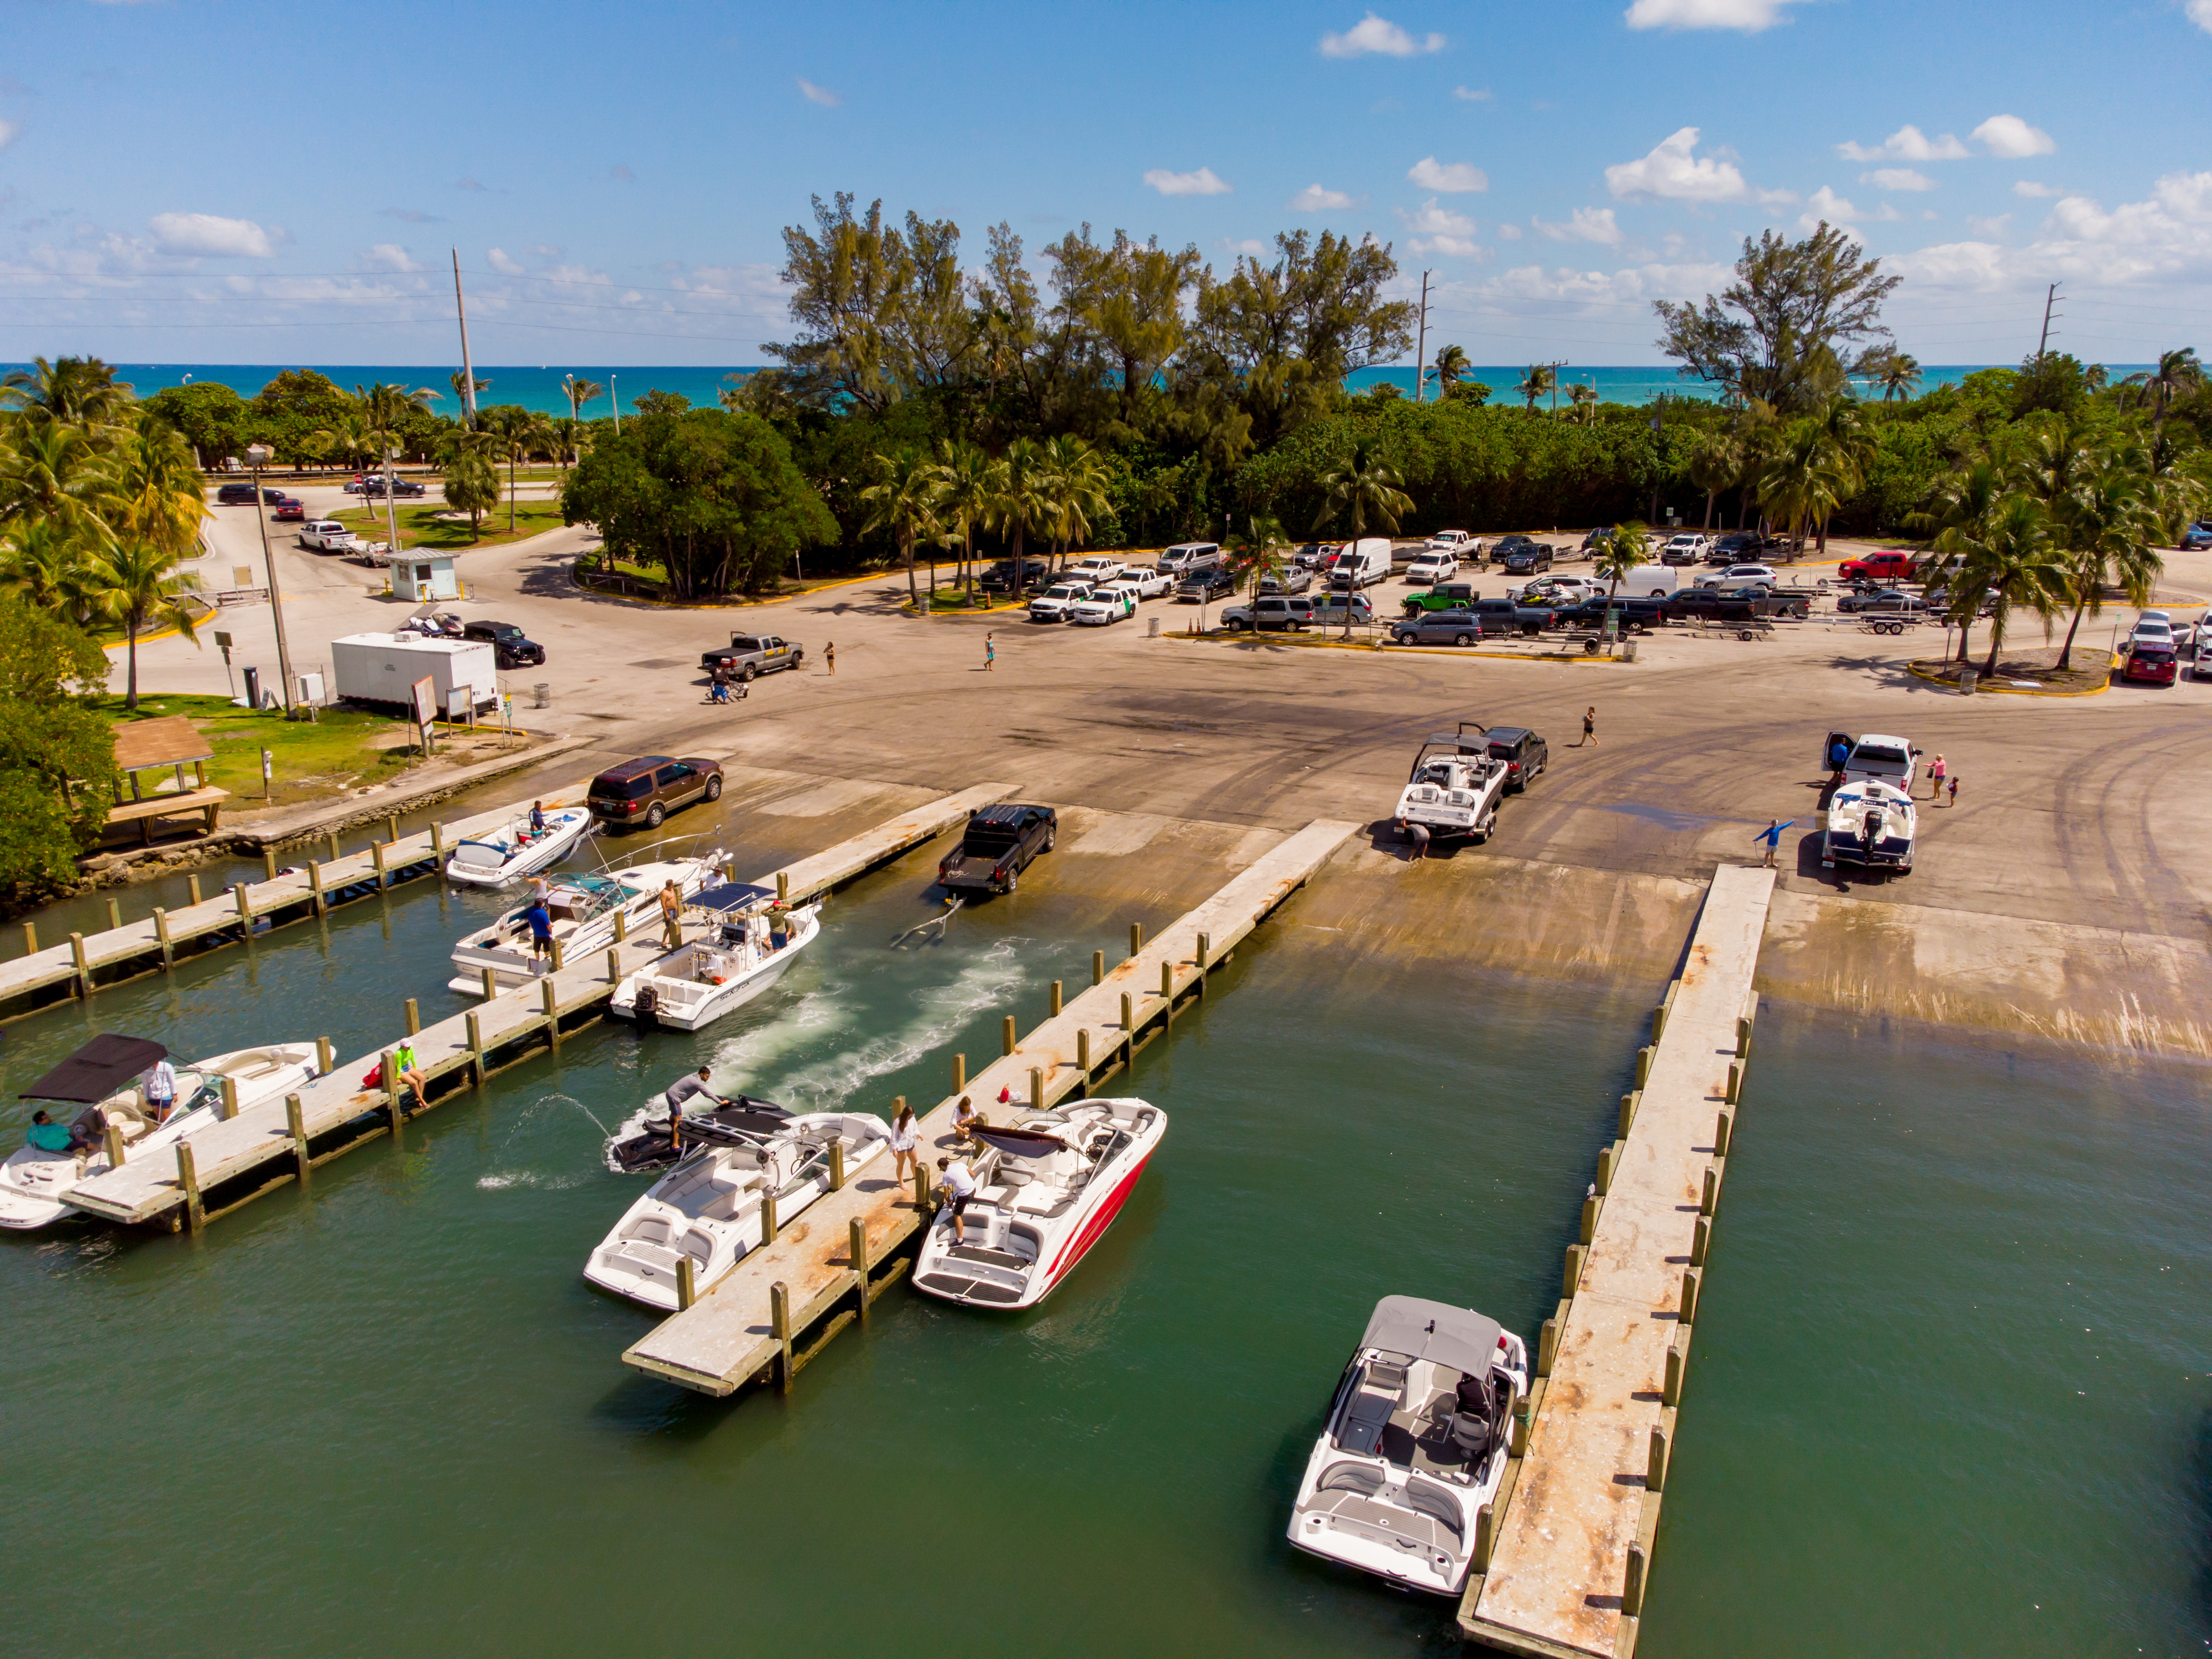 Find boat moorage and dockage with Boaters List!